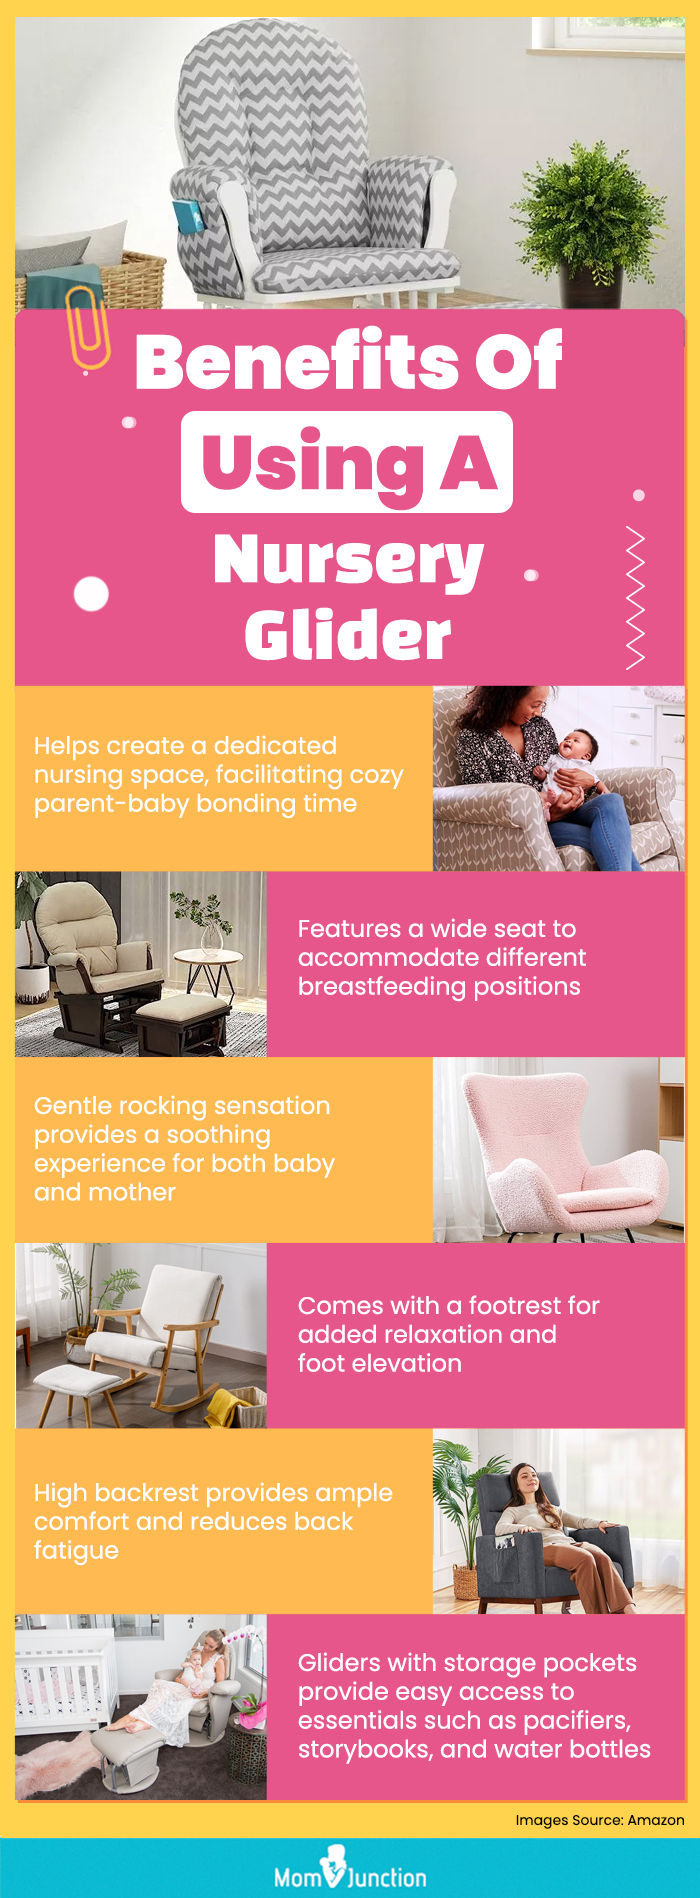 Benefits Of Using A Nursery Glider (infographic)